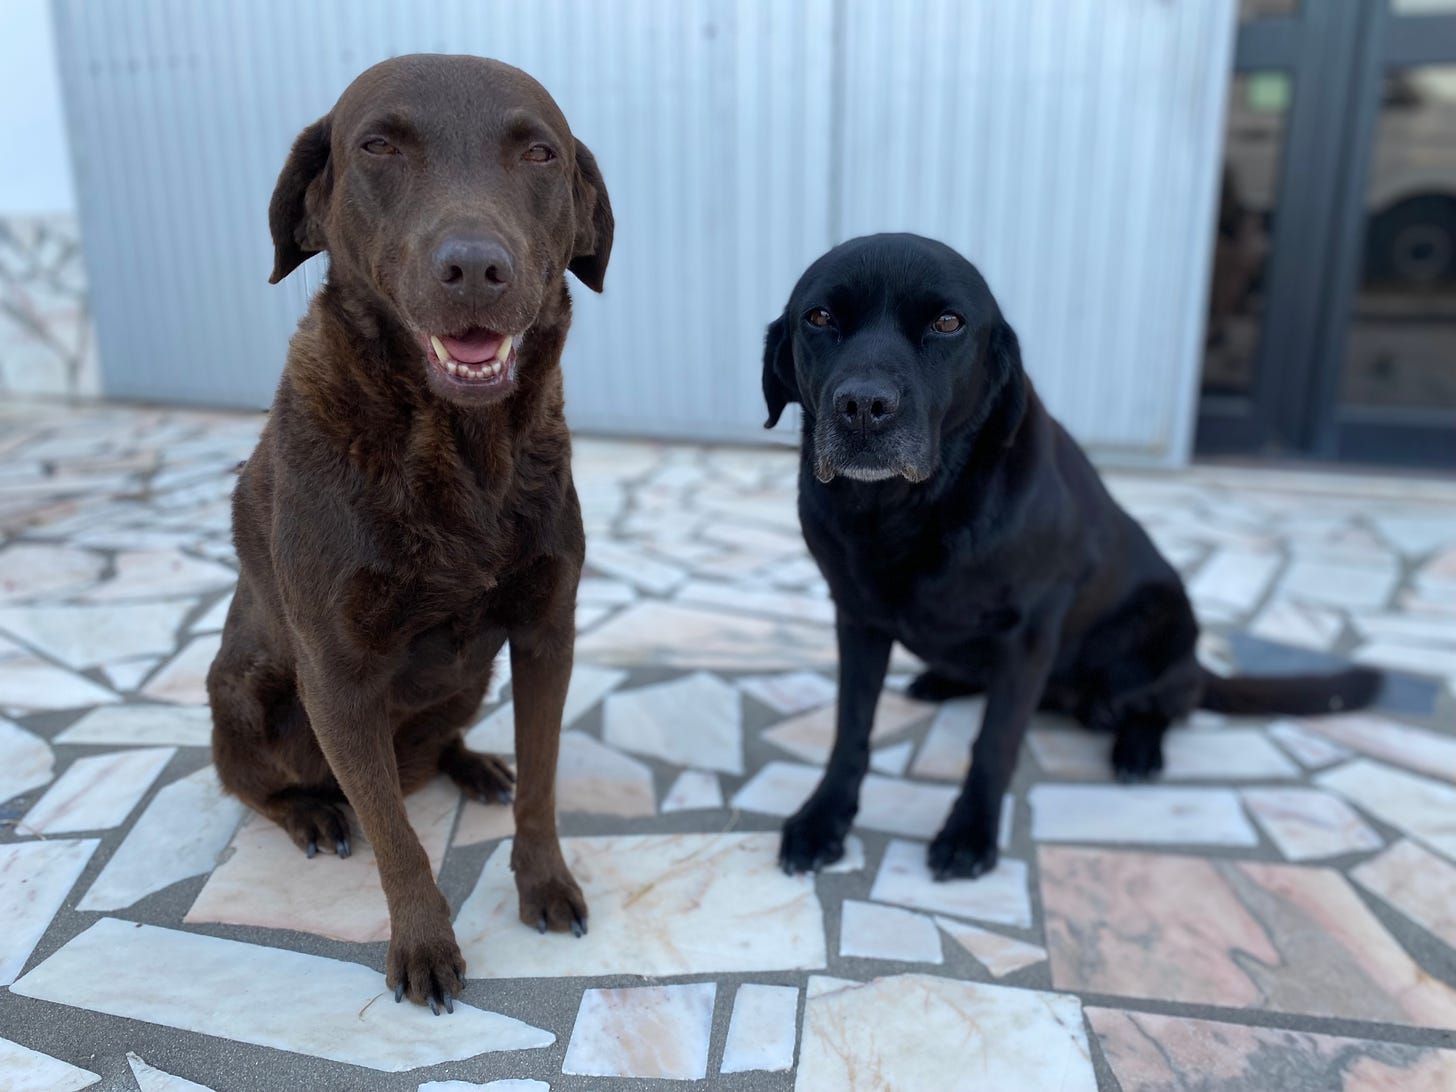 Two hairy beast labrador hounds Hummock and Bobby Starlite-Campbell in Samora, Correia, Portugal